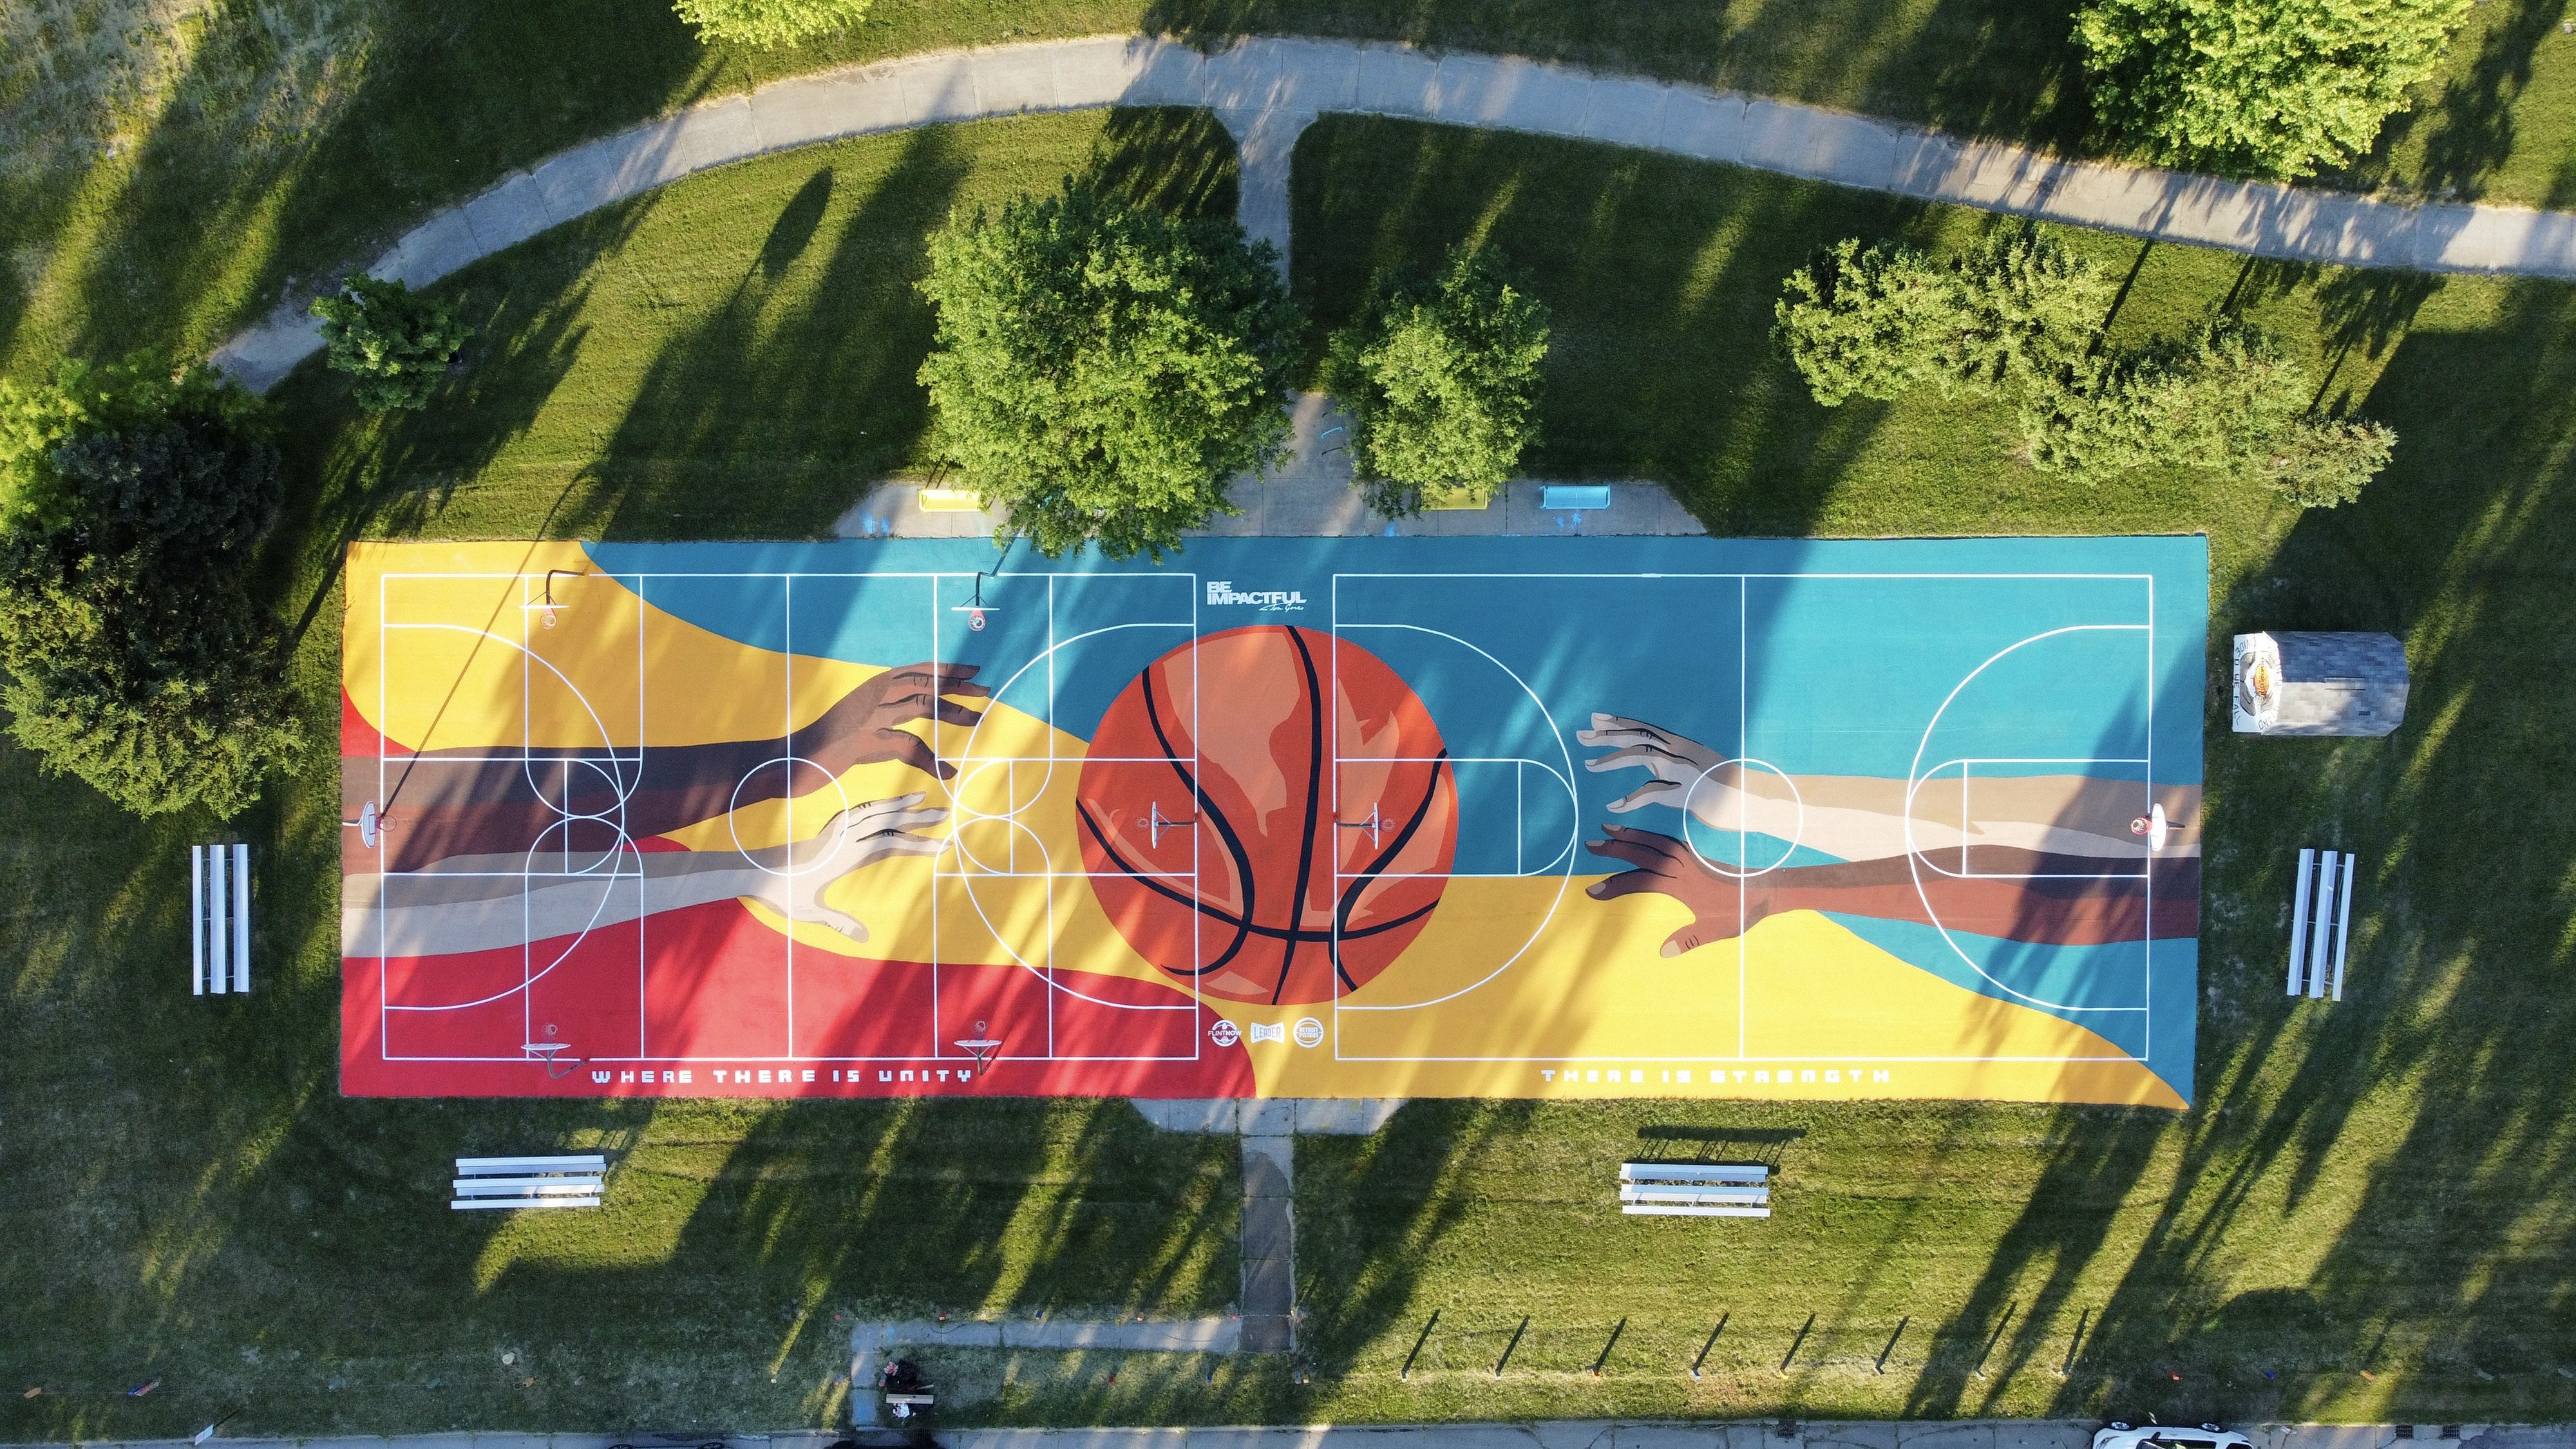 Tom Gores’ FlintNOW Foundation Joins Forces With Flint Artist, Local Advocates And Parks Officials To Renovate Basketball Courts In Genesee County